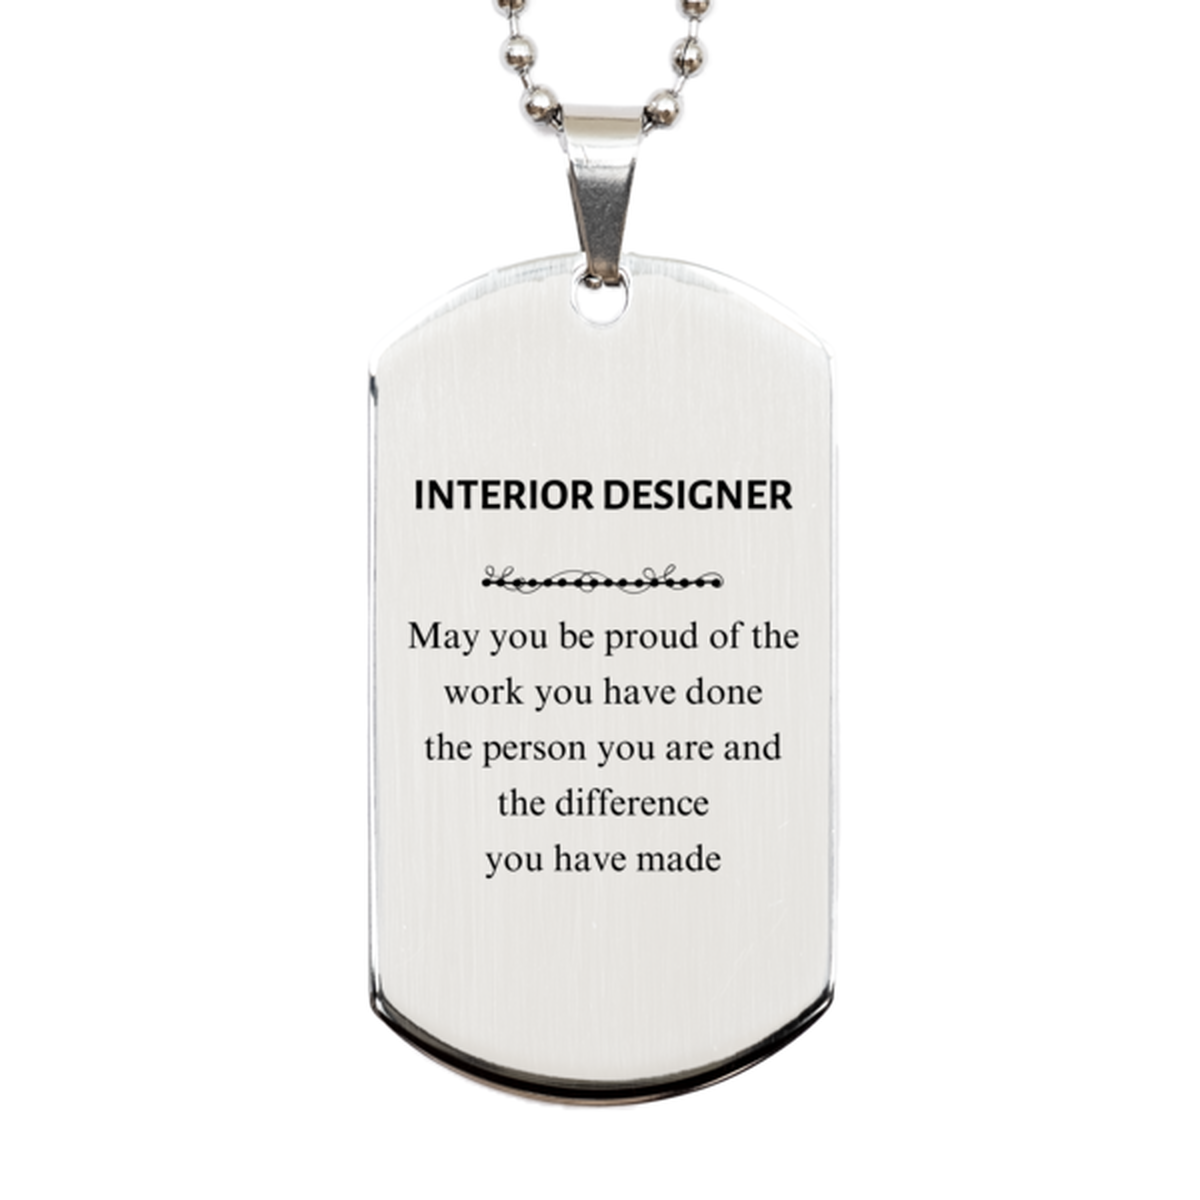 Interior Designer May you be proud of the work you have done, Retirement Interior Designer Silver Dog Tag for Colleague Appreciation Gifts Amazing for Interior Designer